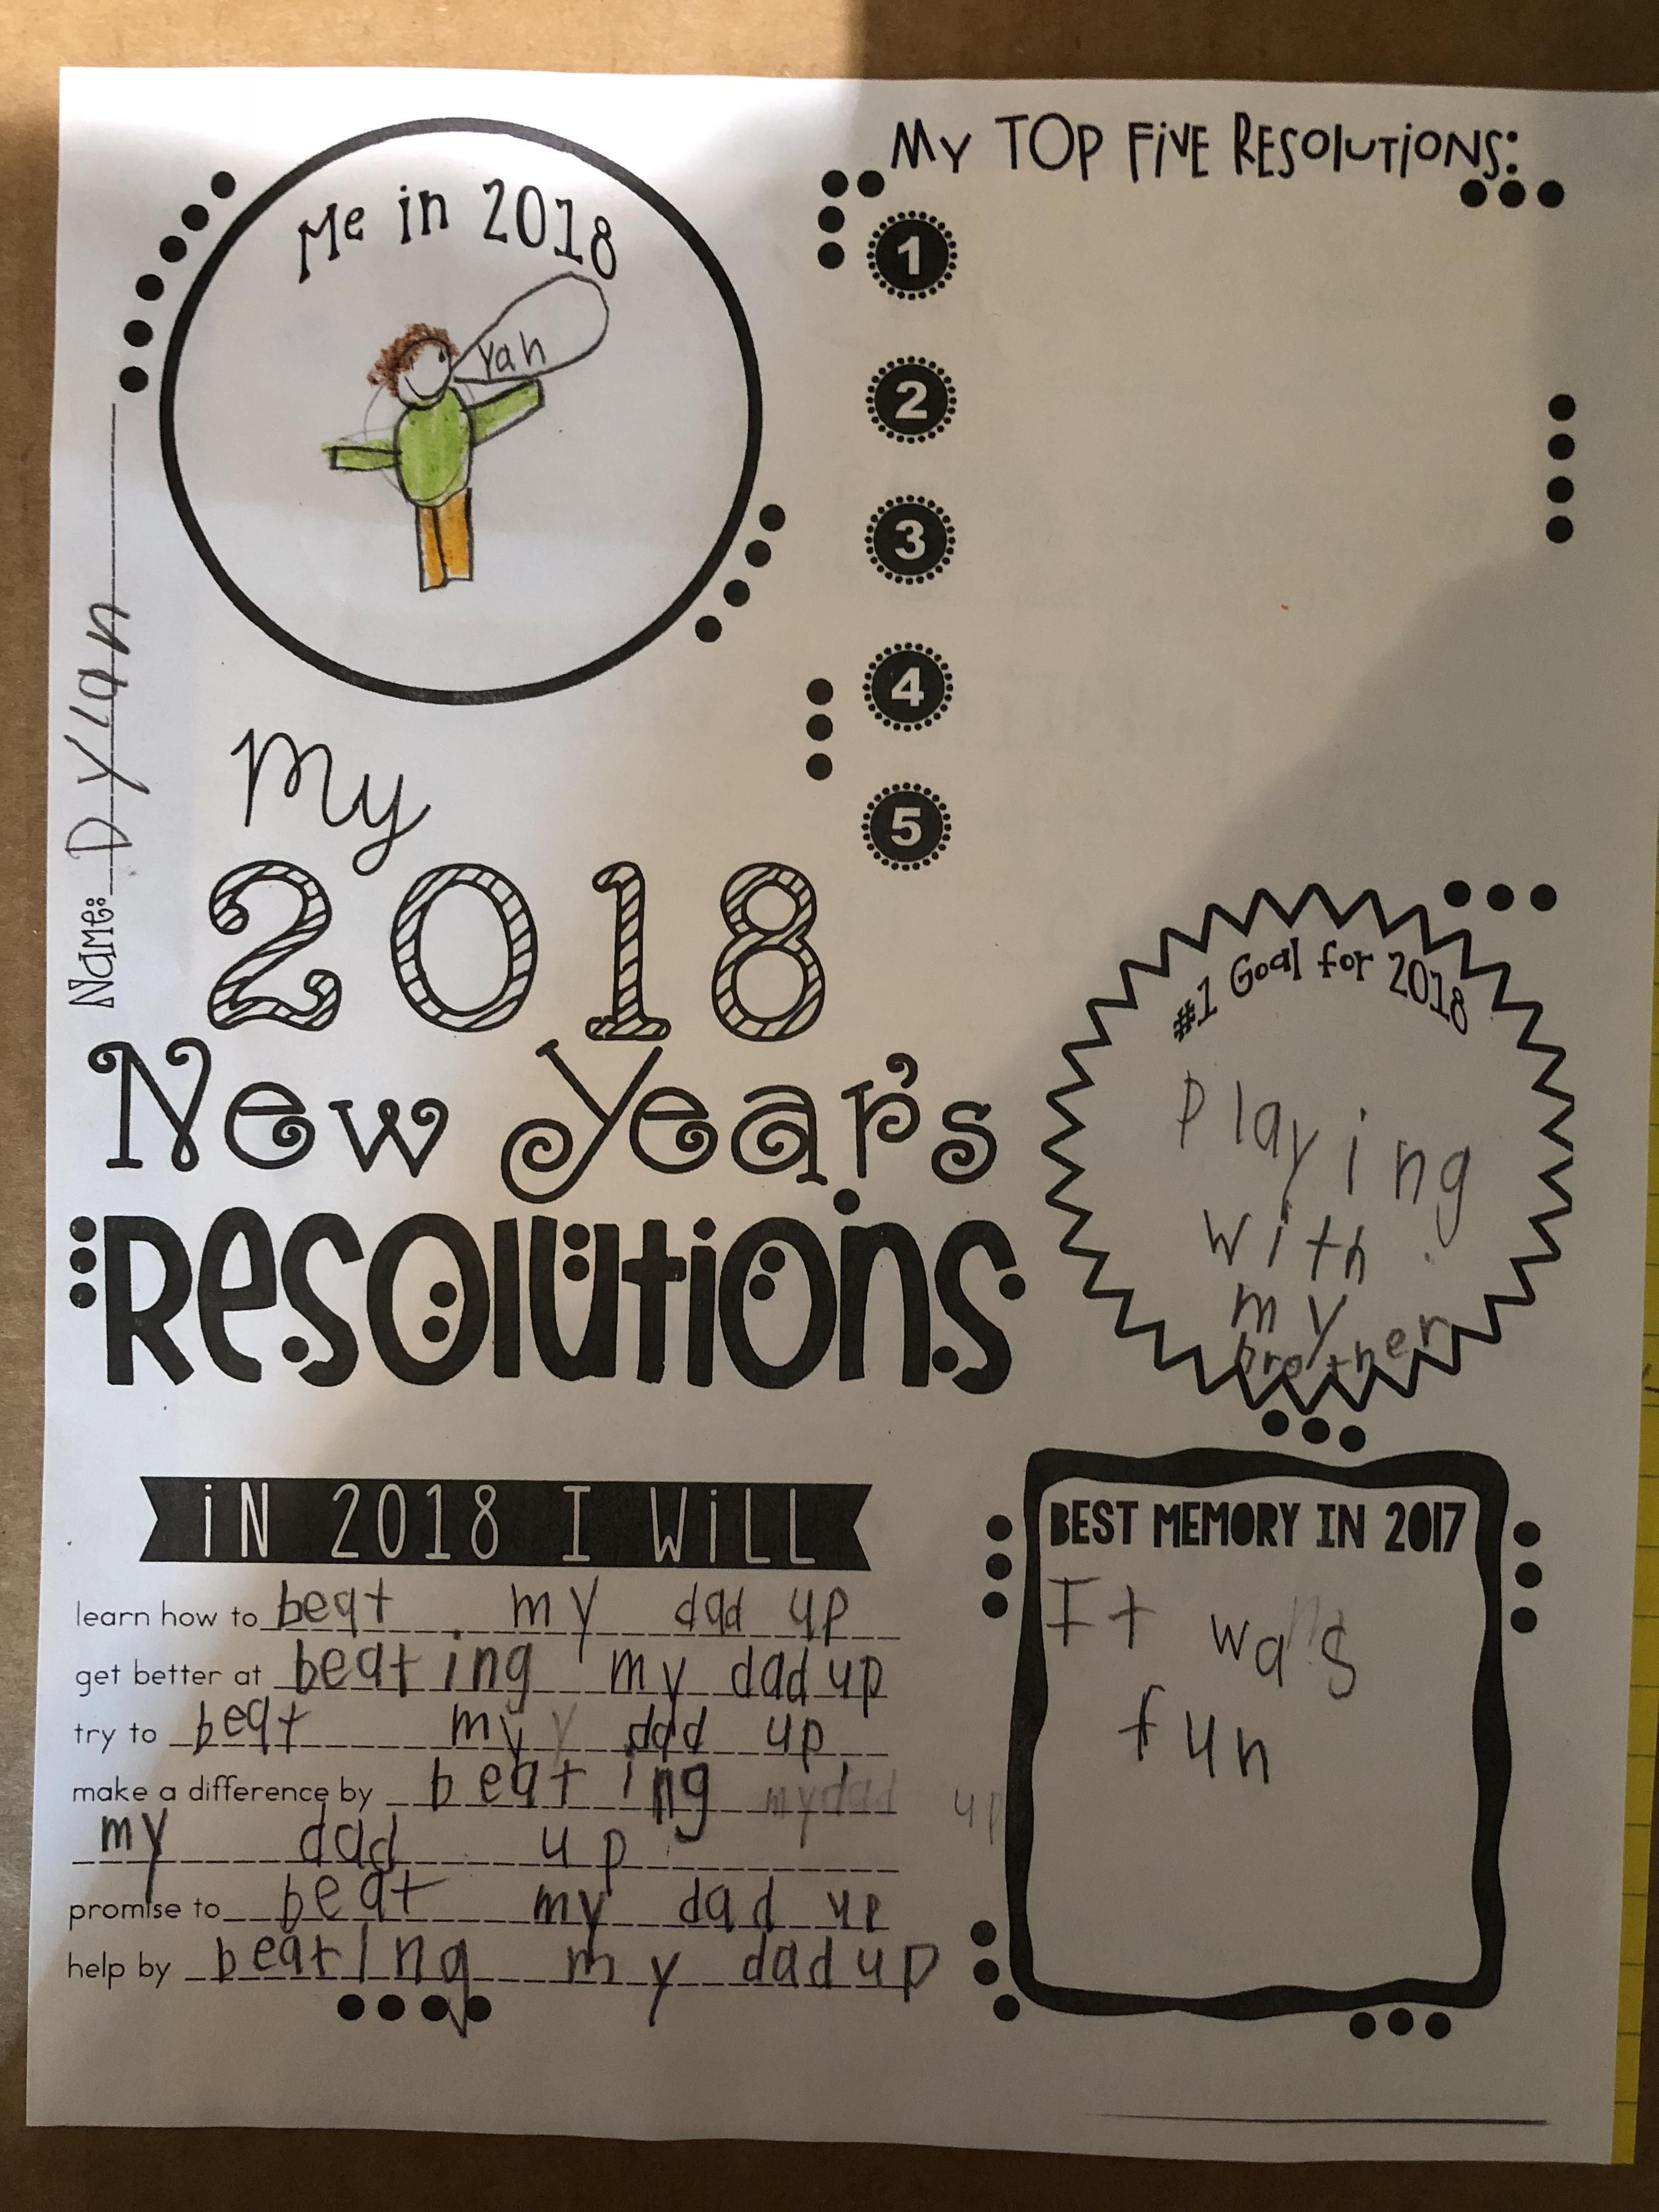 Pretty sure my 6-year-old’s final end goal this year is to kill me